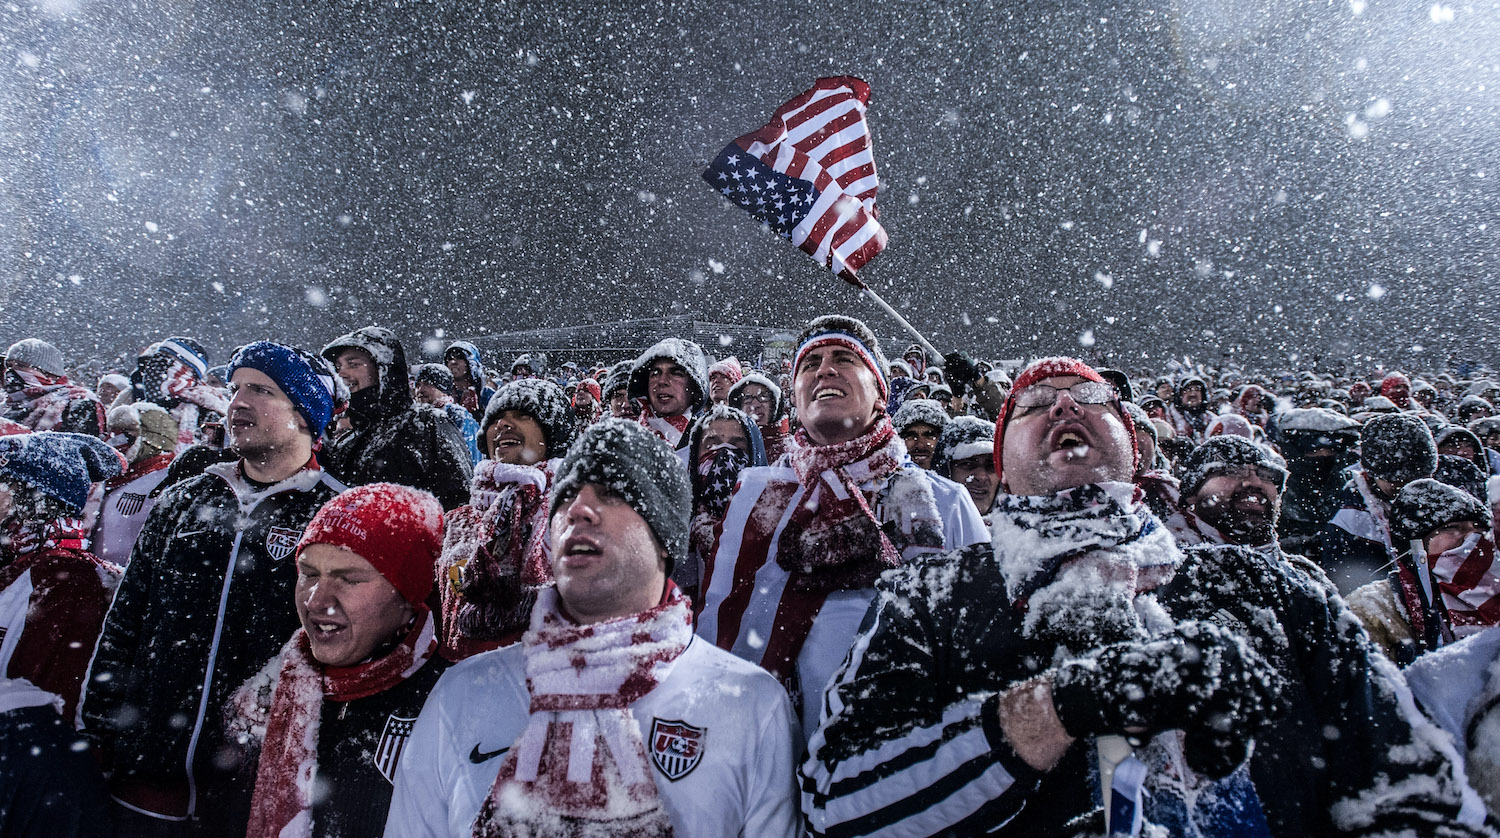 COMMERCE CITY, CO - MARCH 22: Fans of the United States national team cheer, wave a flag, and sing as snow falls during a FIFA 2014 World Cup Qualifier match between Costa Rica and United States at Dick's Sporting Goods Park on March 22, 2013 in Commerce City, Colorado. (Photo by Dustin Bradford/Getty Images)